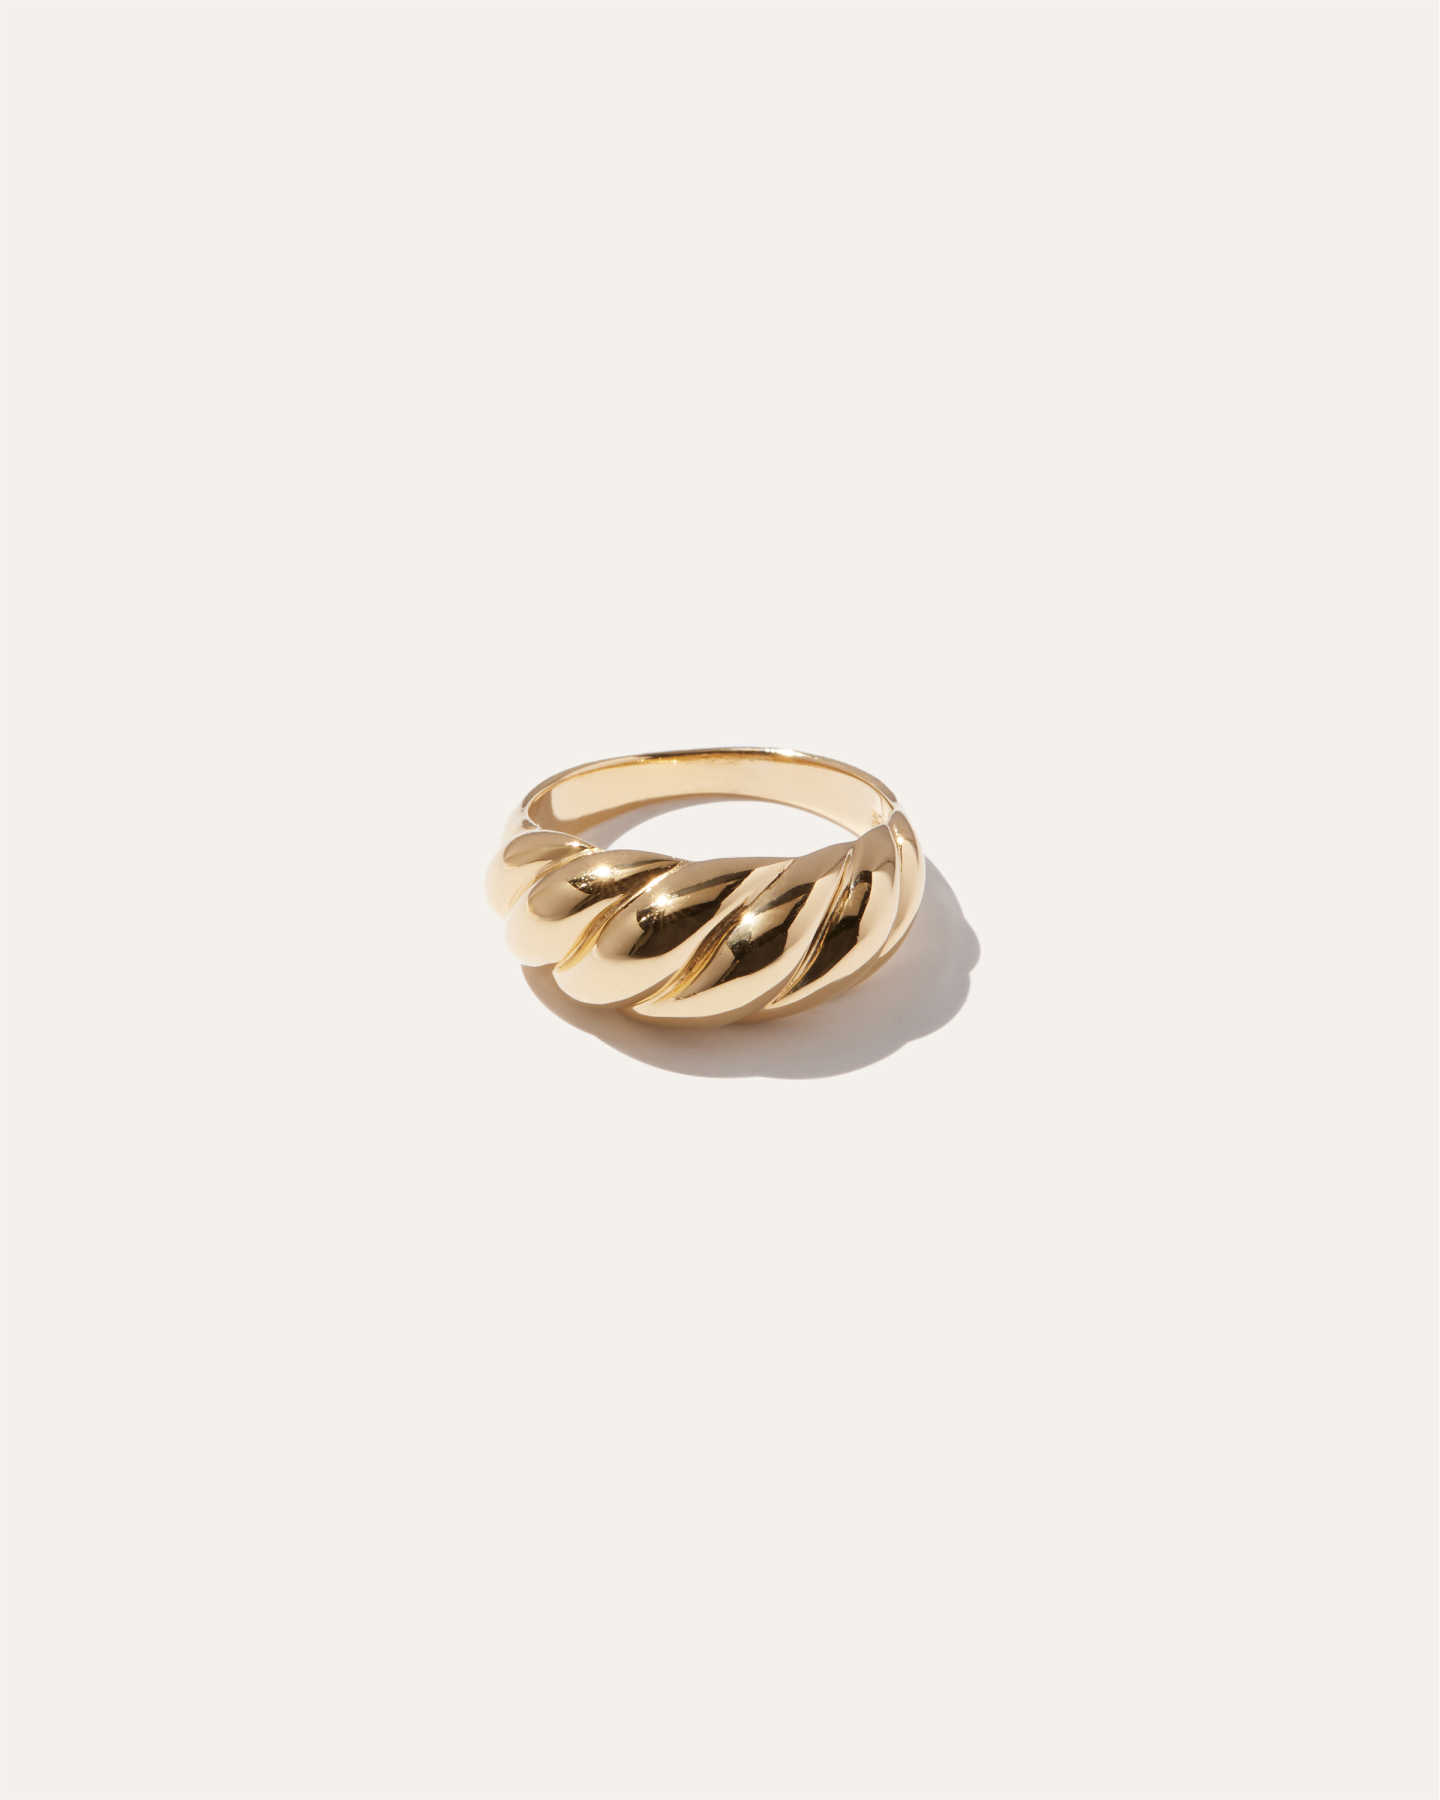 You May Also Like - Croissant Ring - Gold Vermeil